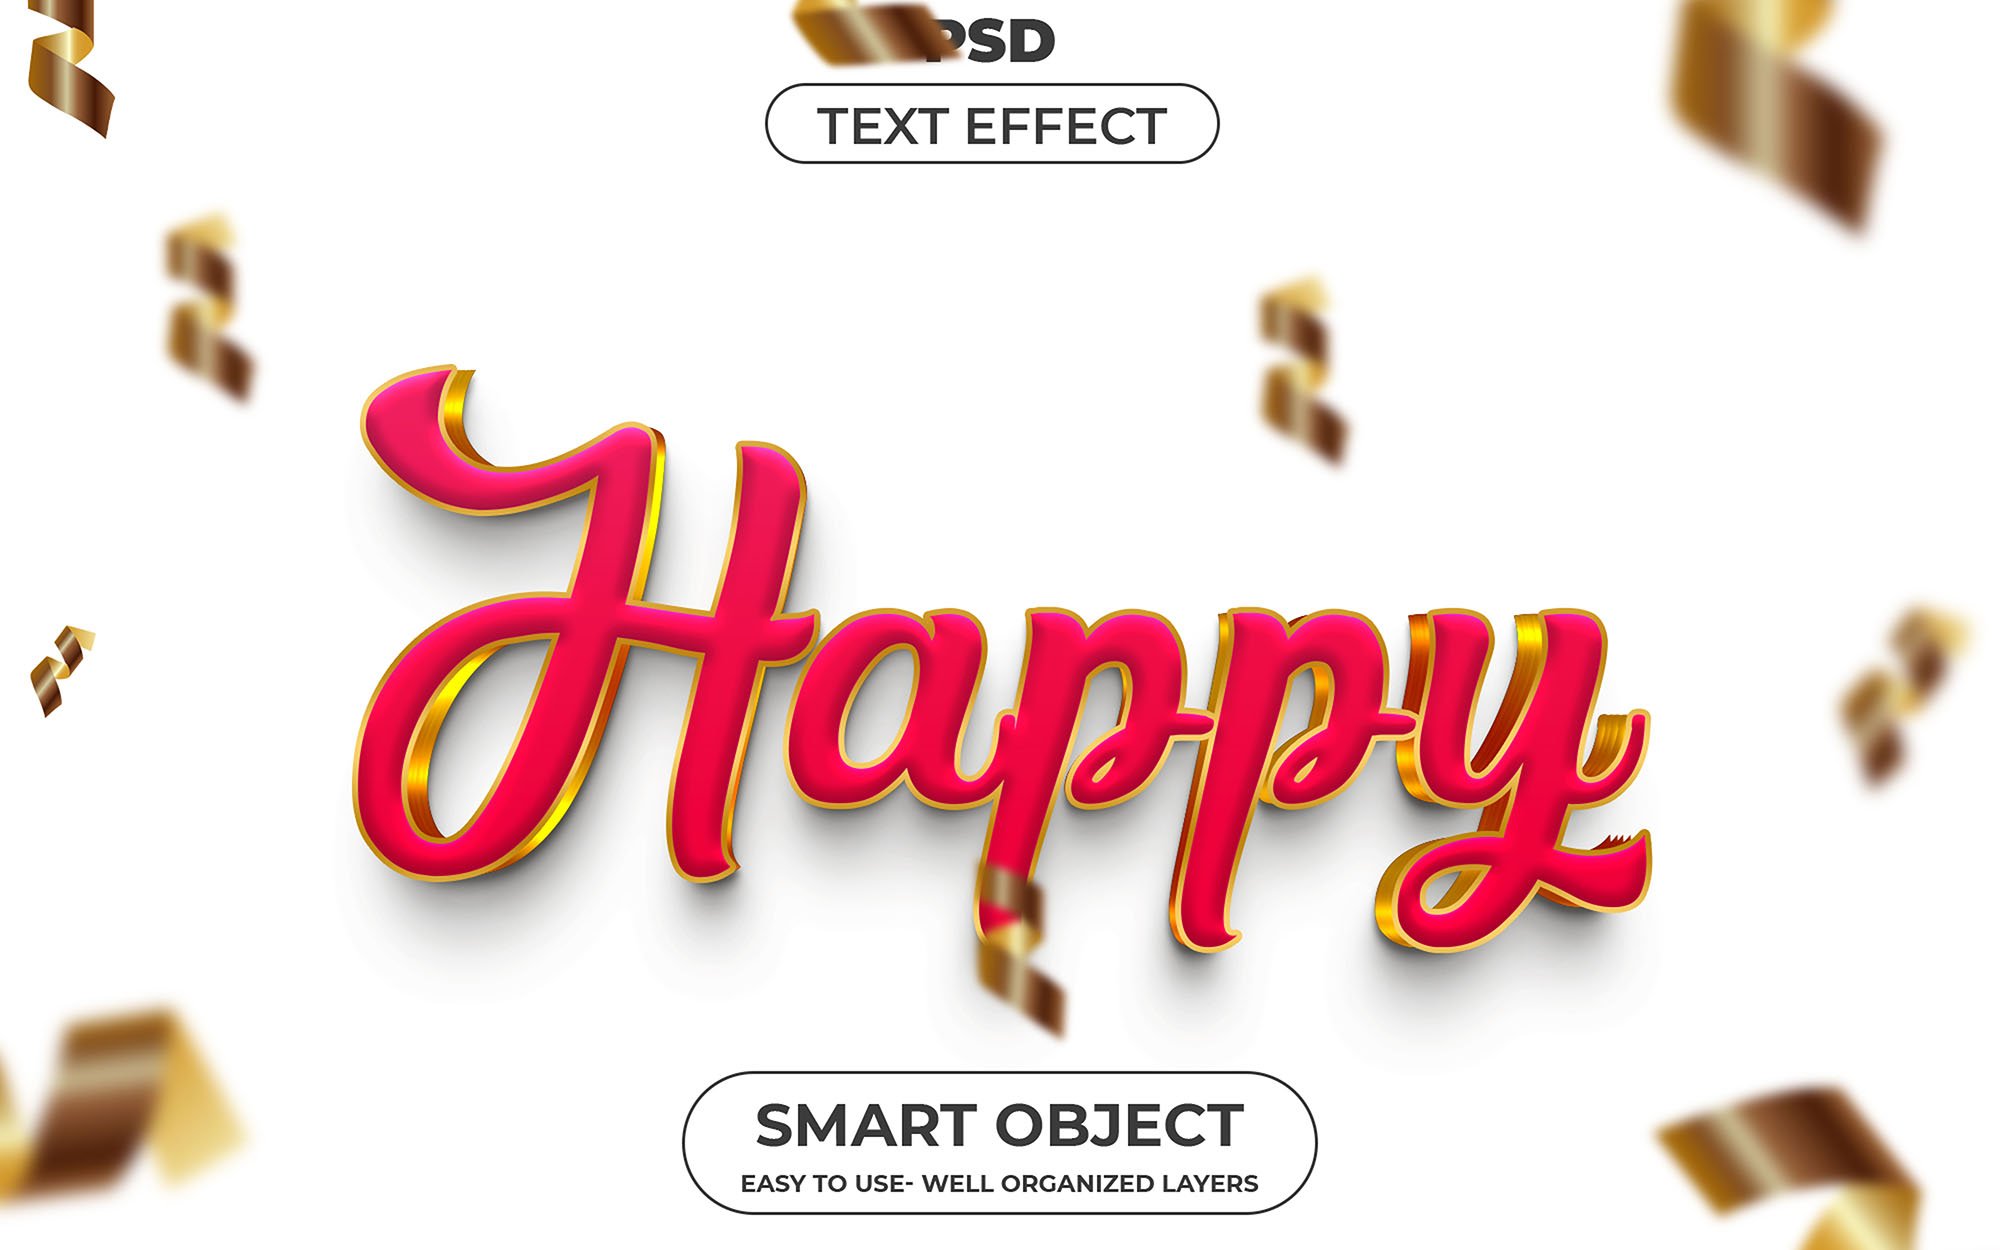 Happy 3d Editable Text Effect Stylecover image.